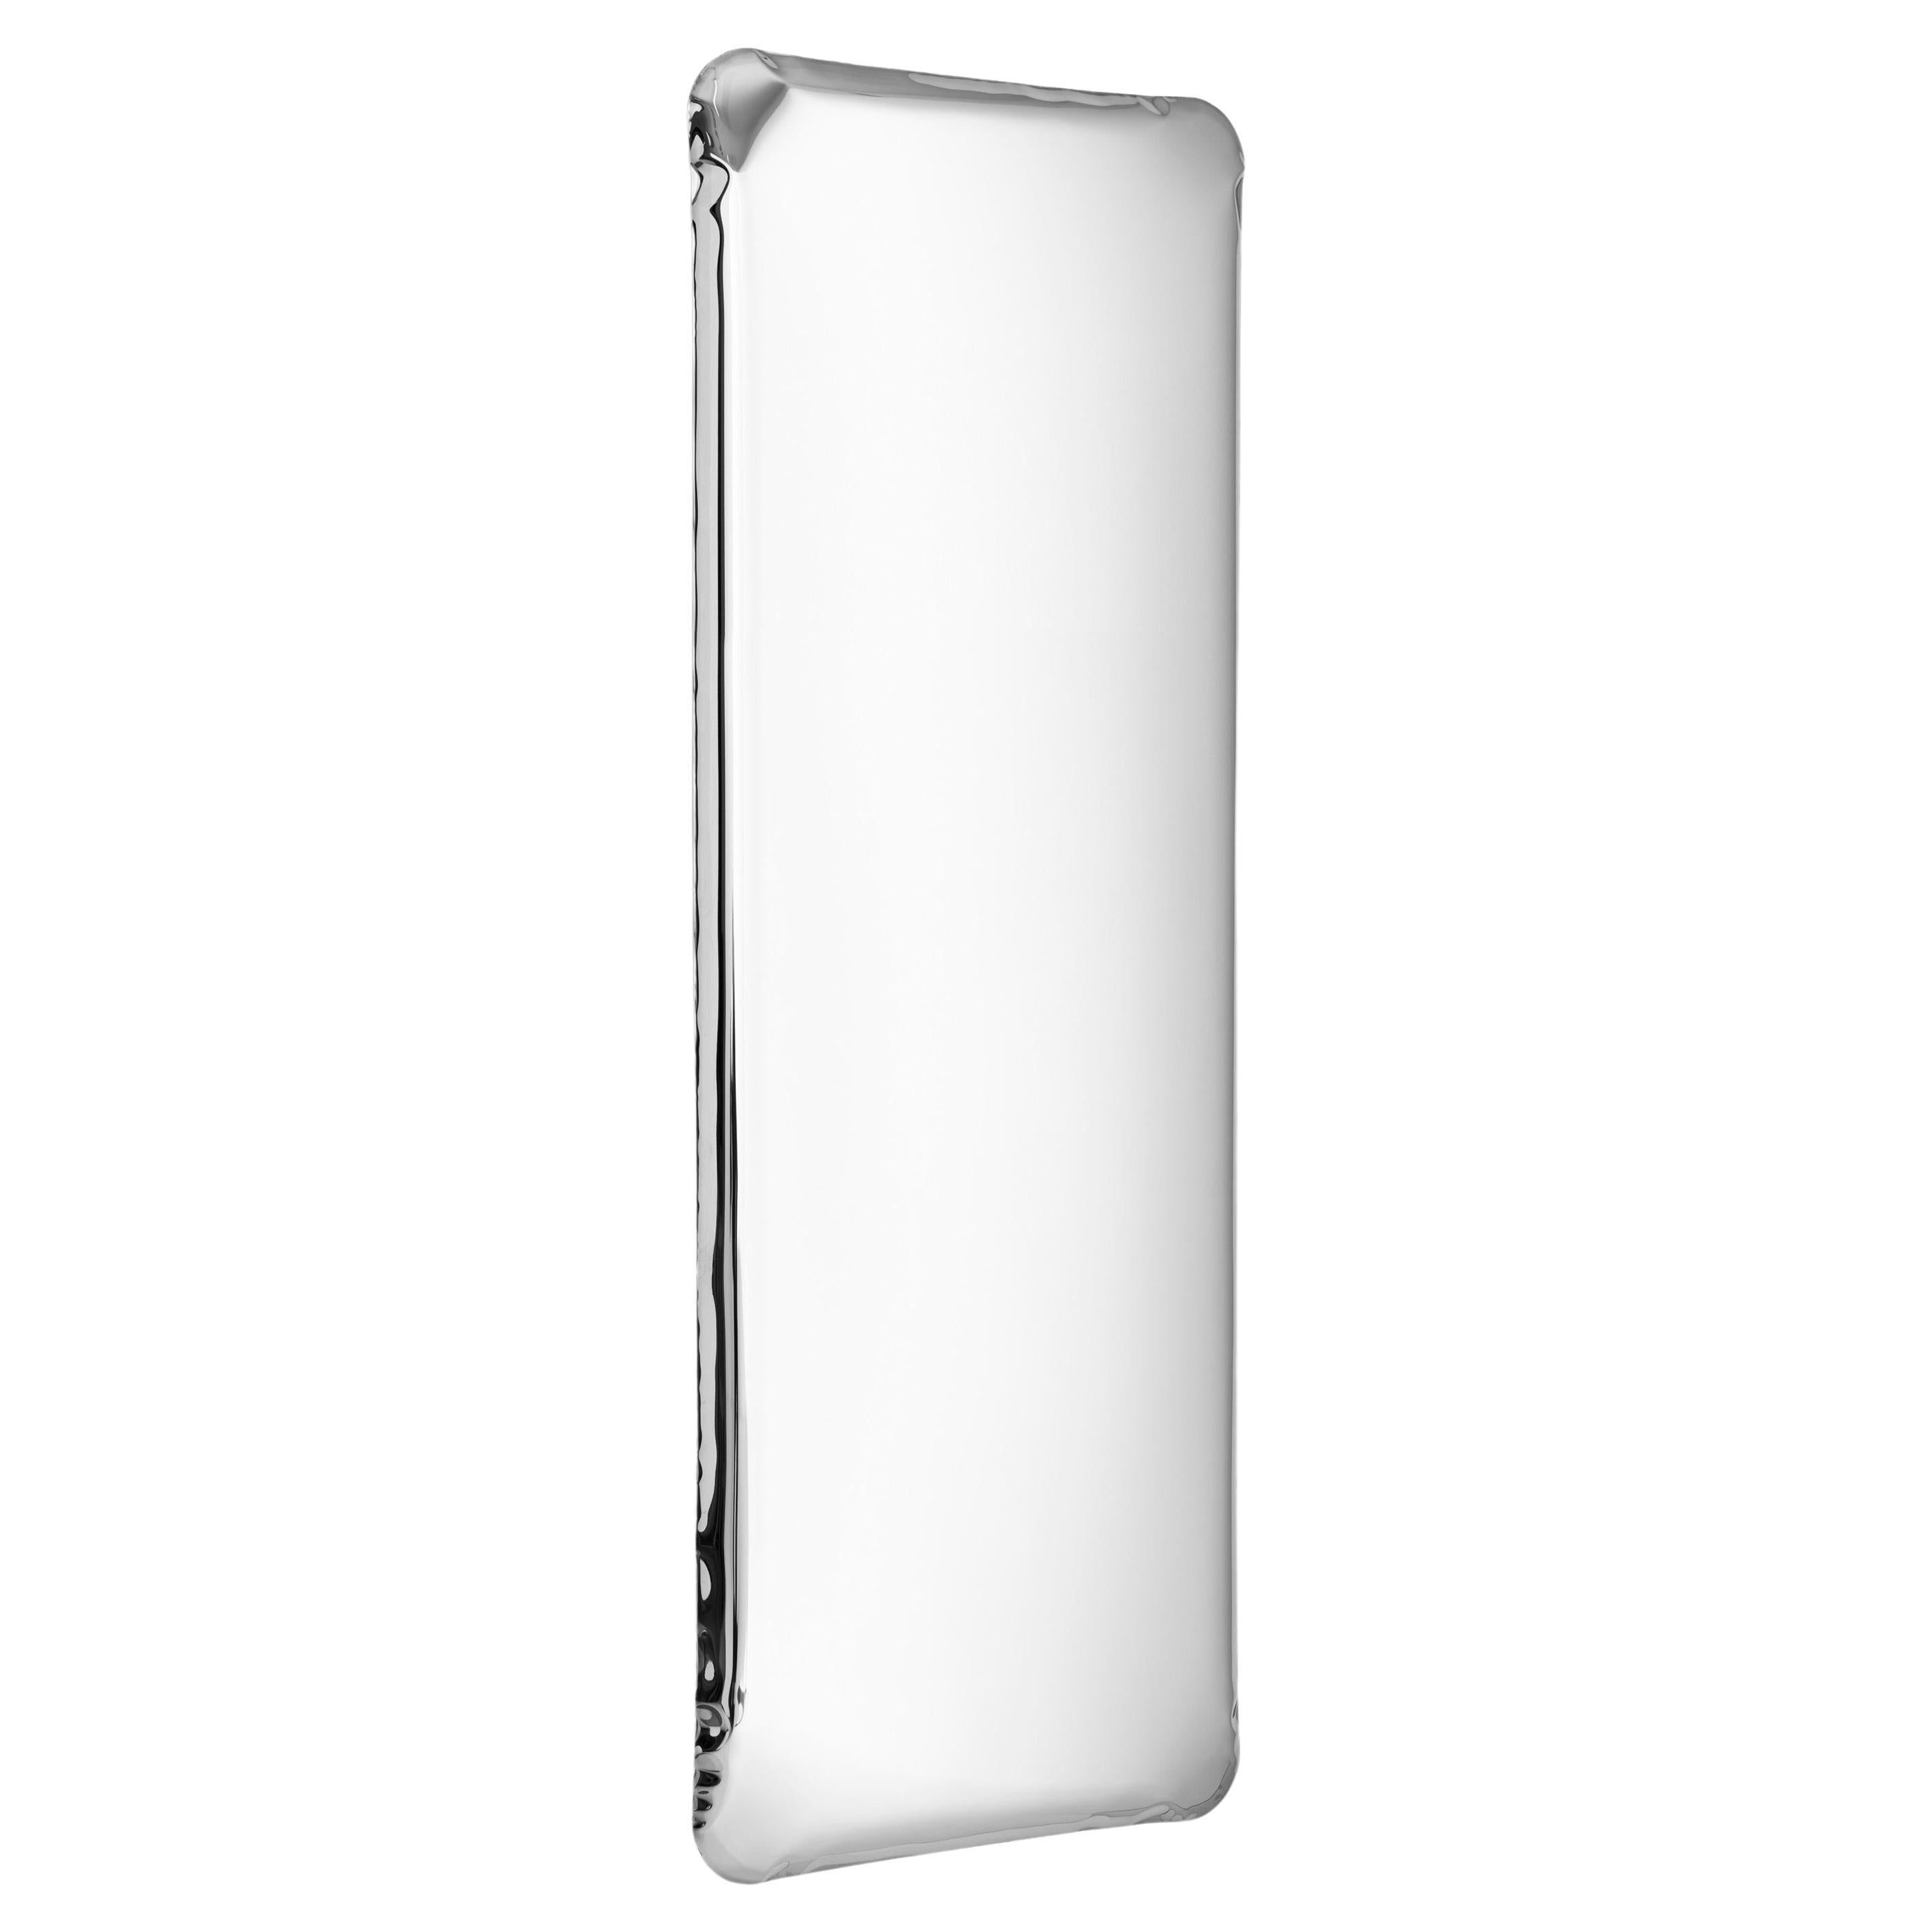 Stainless Steel Tafla Q1 Sculptural Wall Mirror by Zieta For Sale